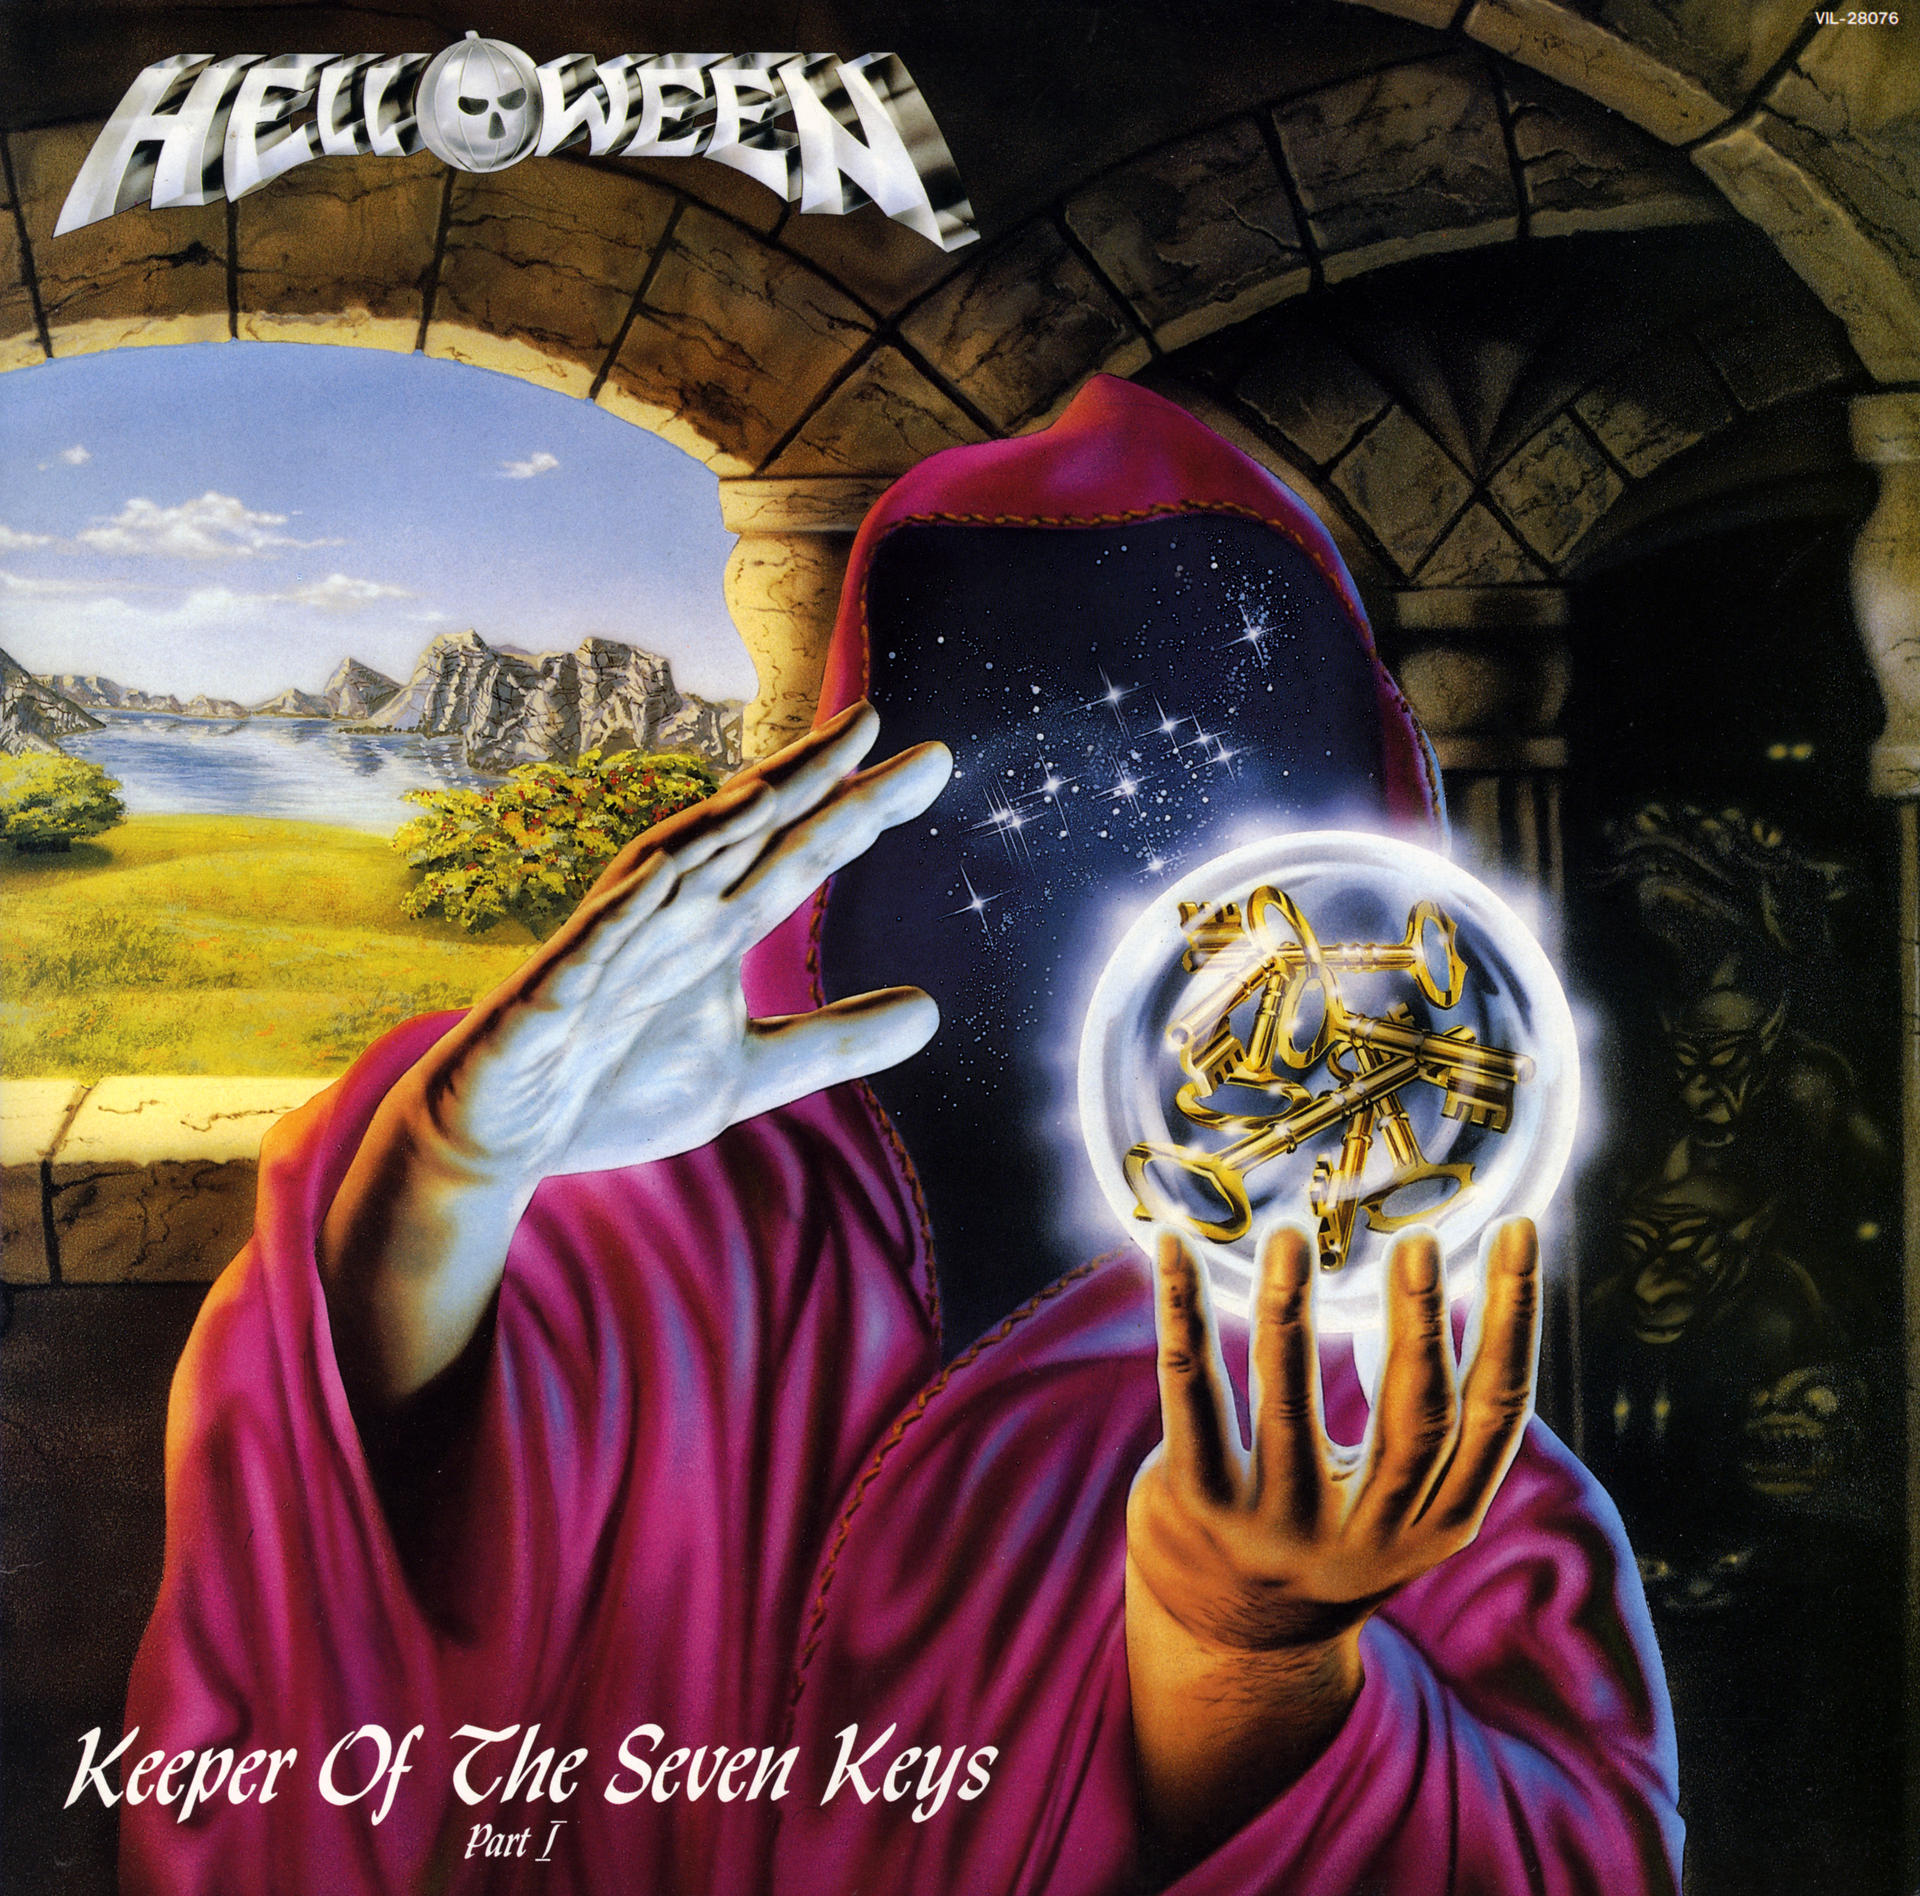 Металл BMG Helloween - Keeper Of The Seven Keys, Part I (Coloured Vinyl LP) 10cc food for thought exp rem 1 cd